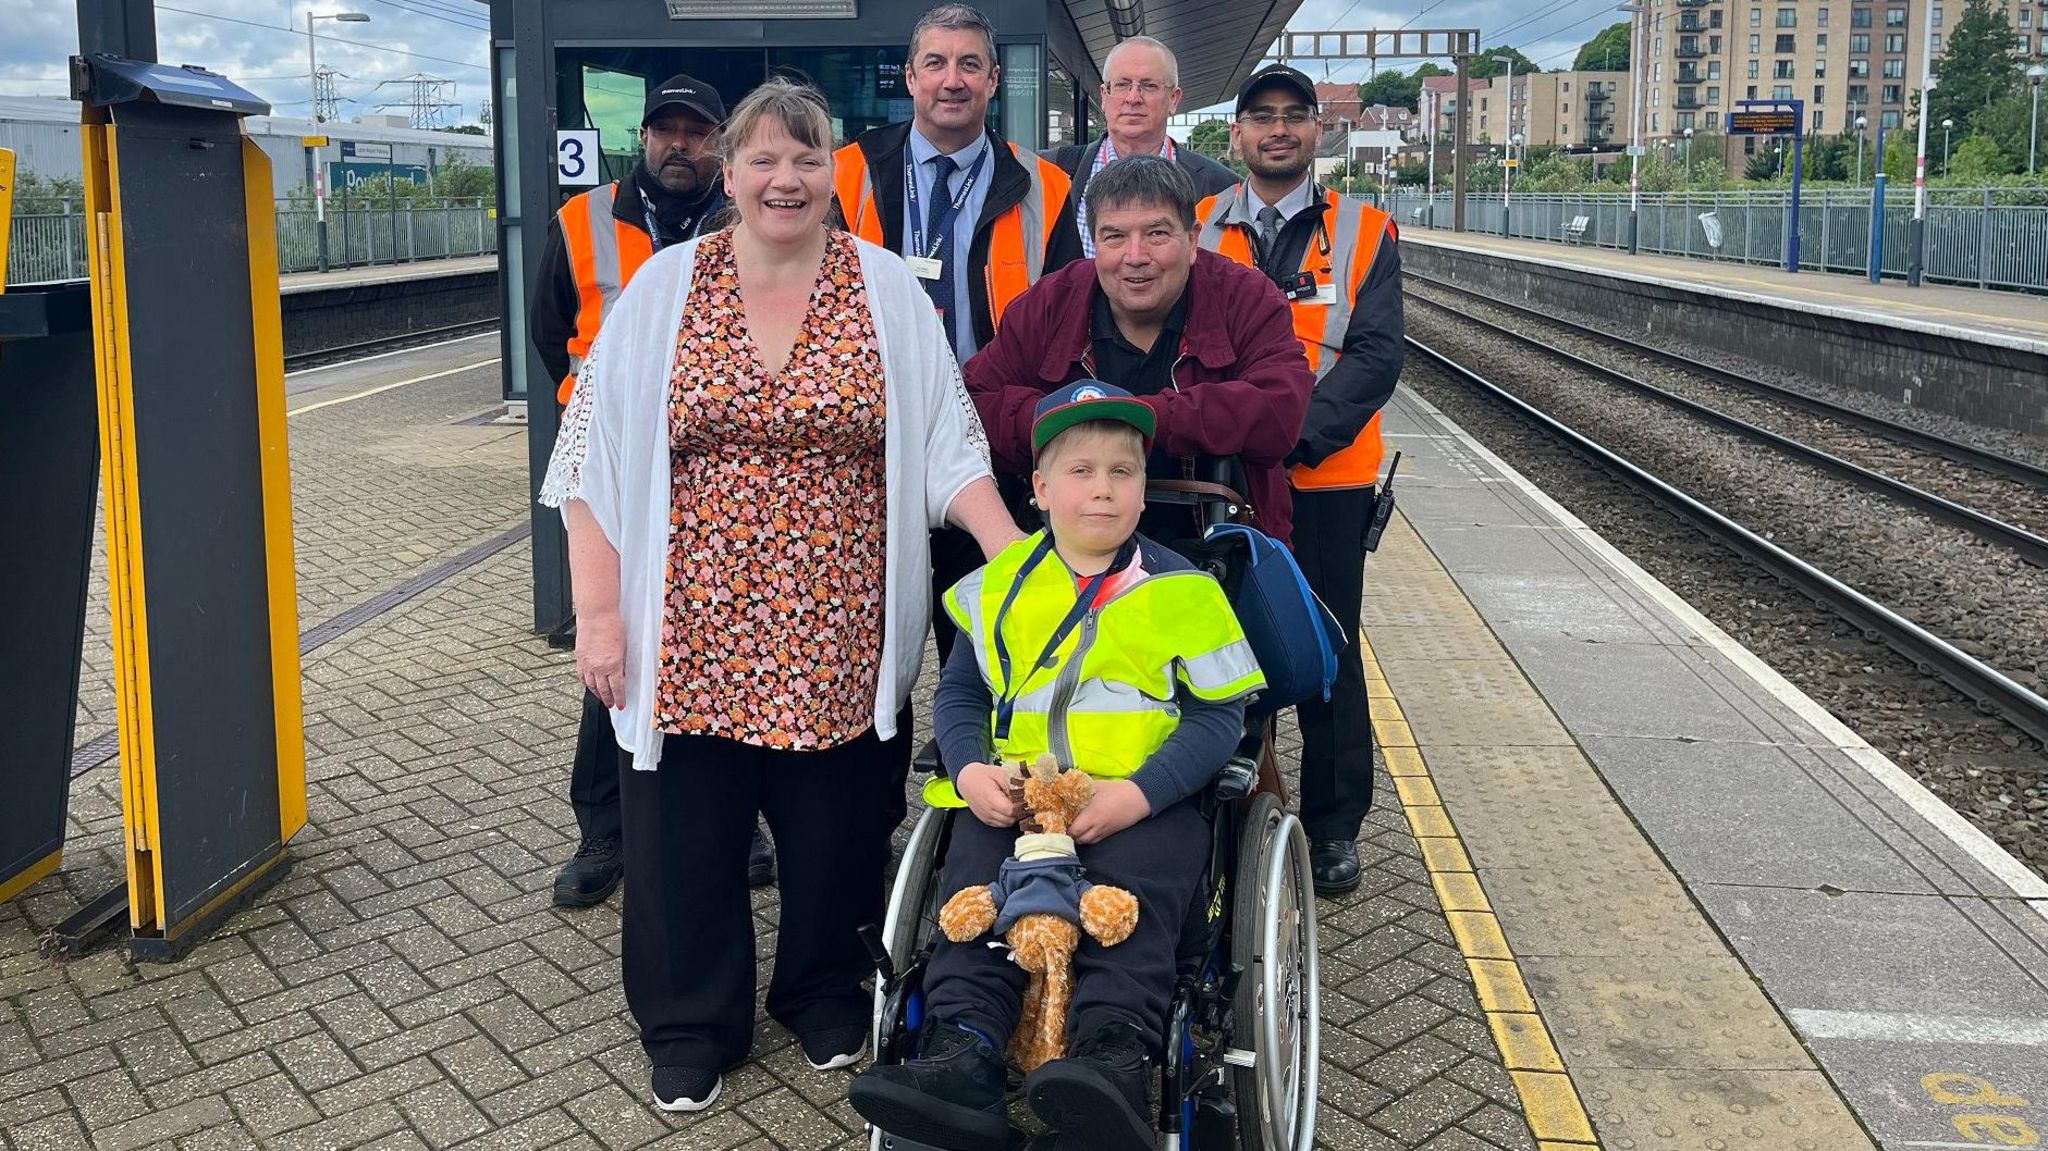 Alfie and his family and railway staff on a platform